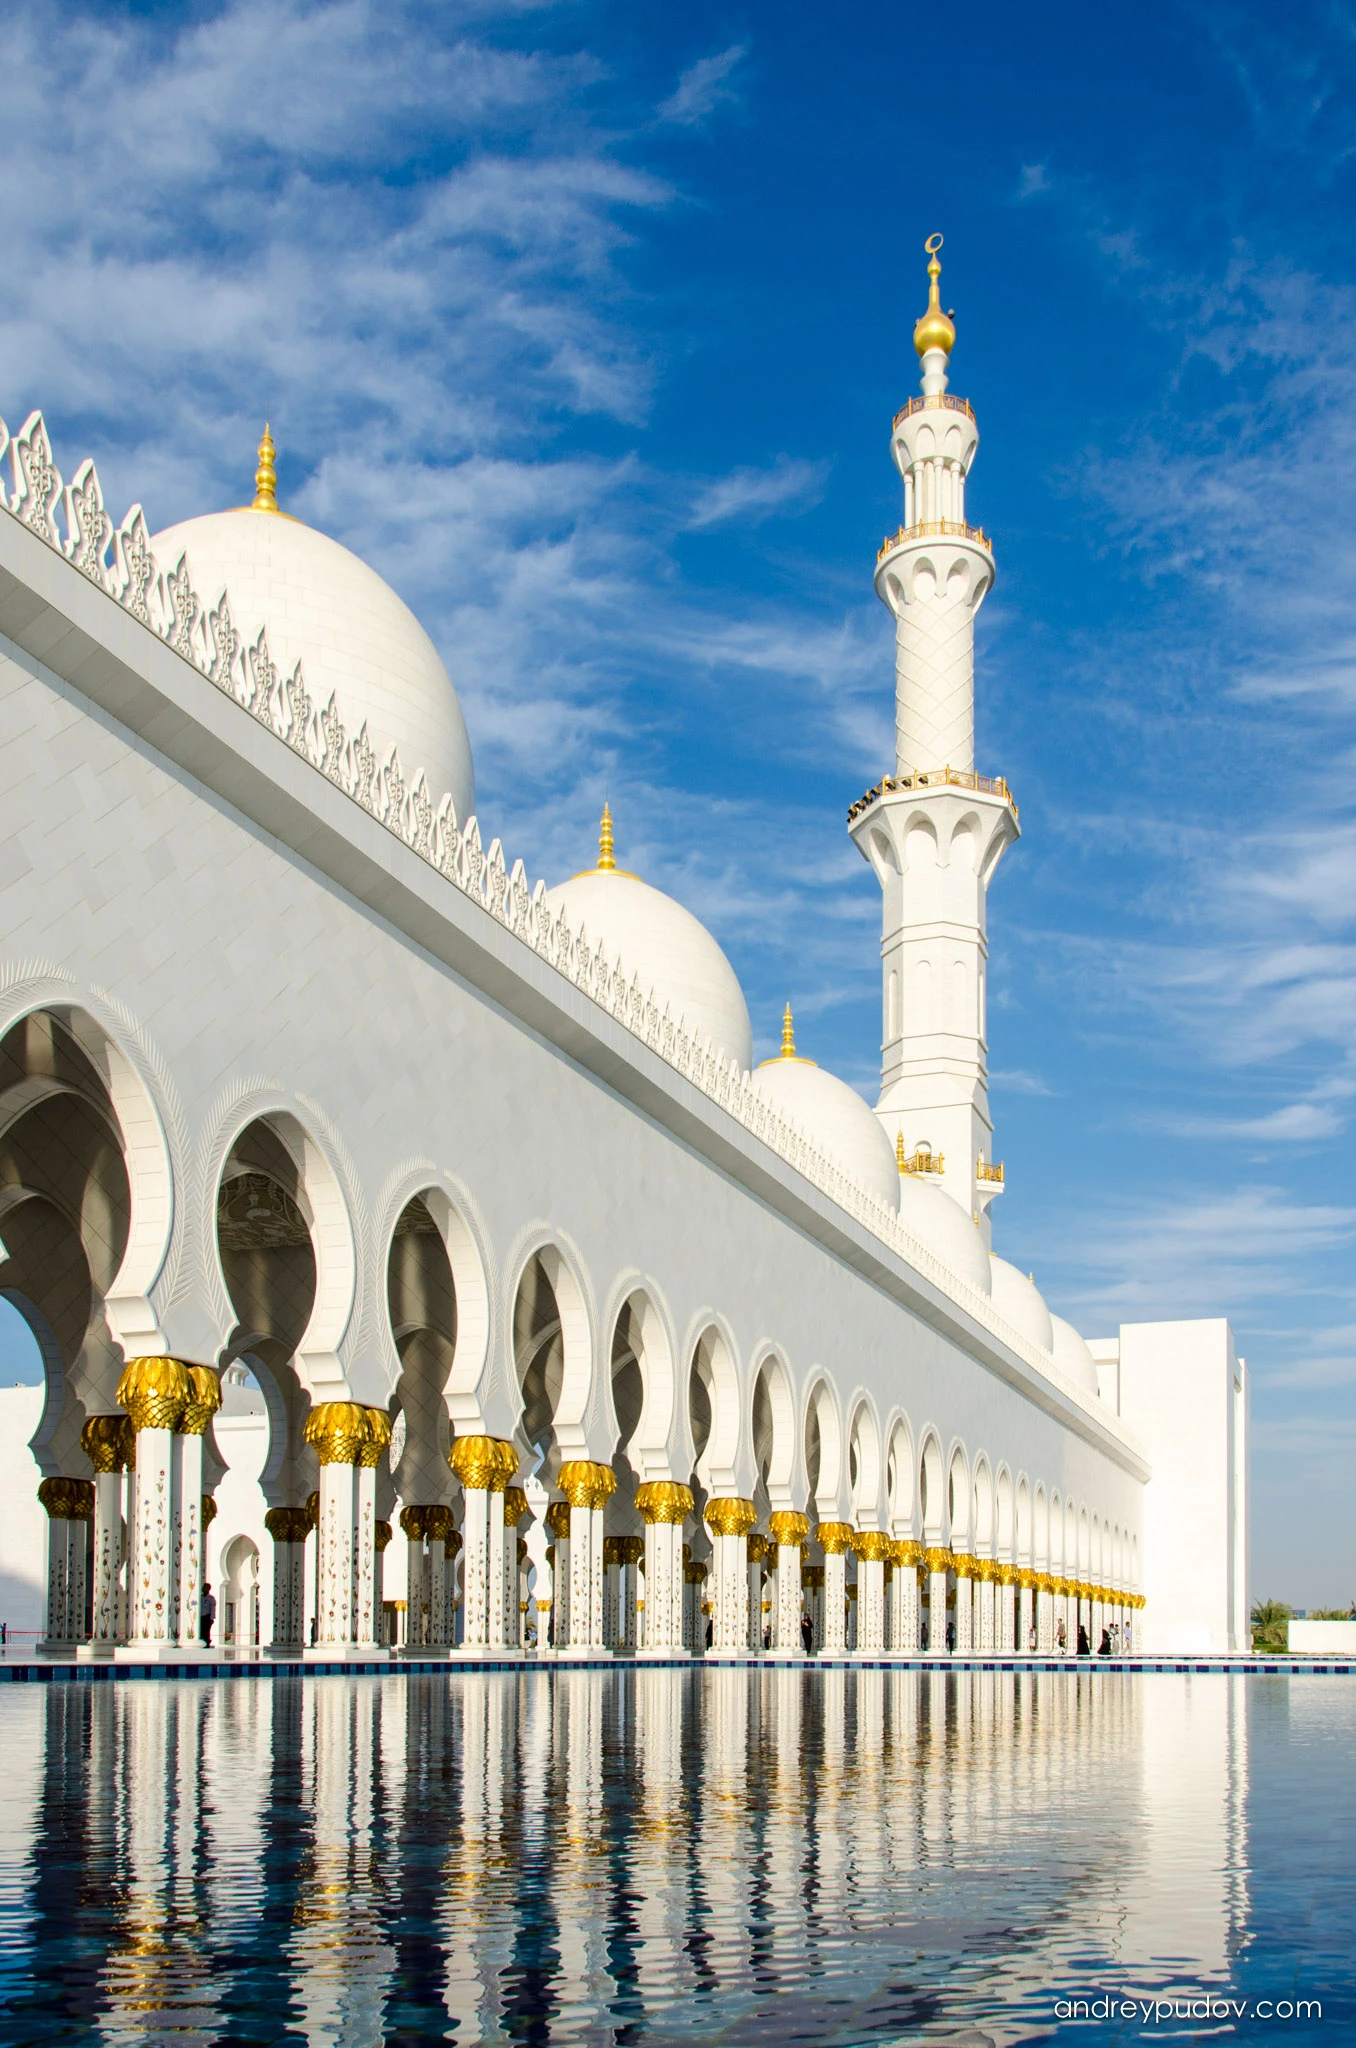 The Sheikh Zayed Grand Mosque is located in Abu Dhabi, the capital city of the United Arab Emirates. The largest mosque in the country, it is the key place of worship for daily prayers. During Eid, it was visited by more than 41,000 people.